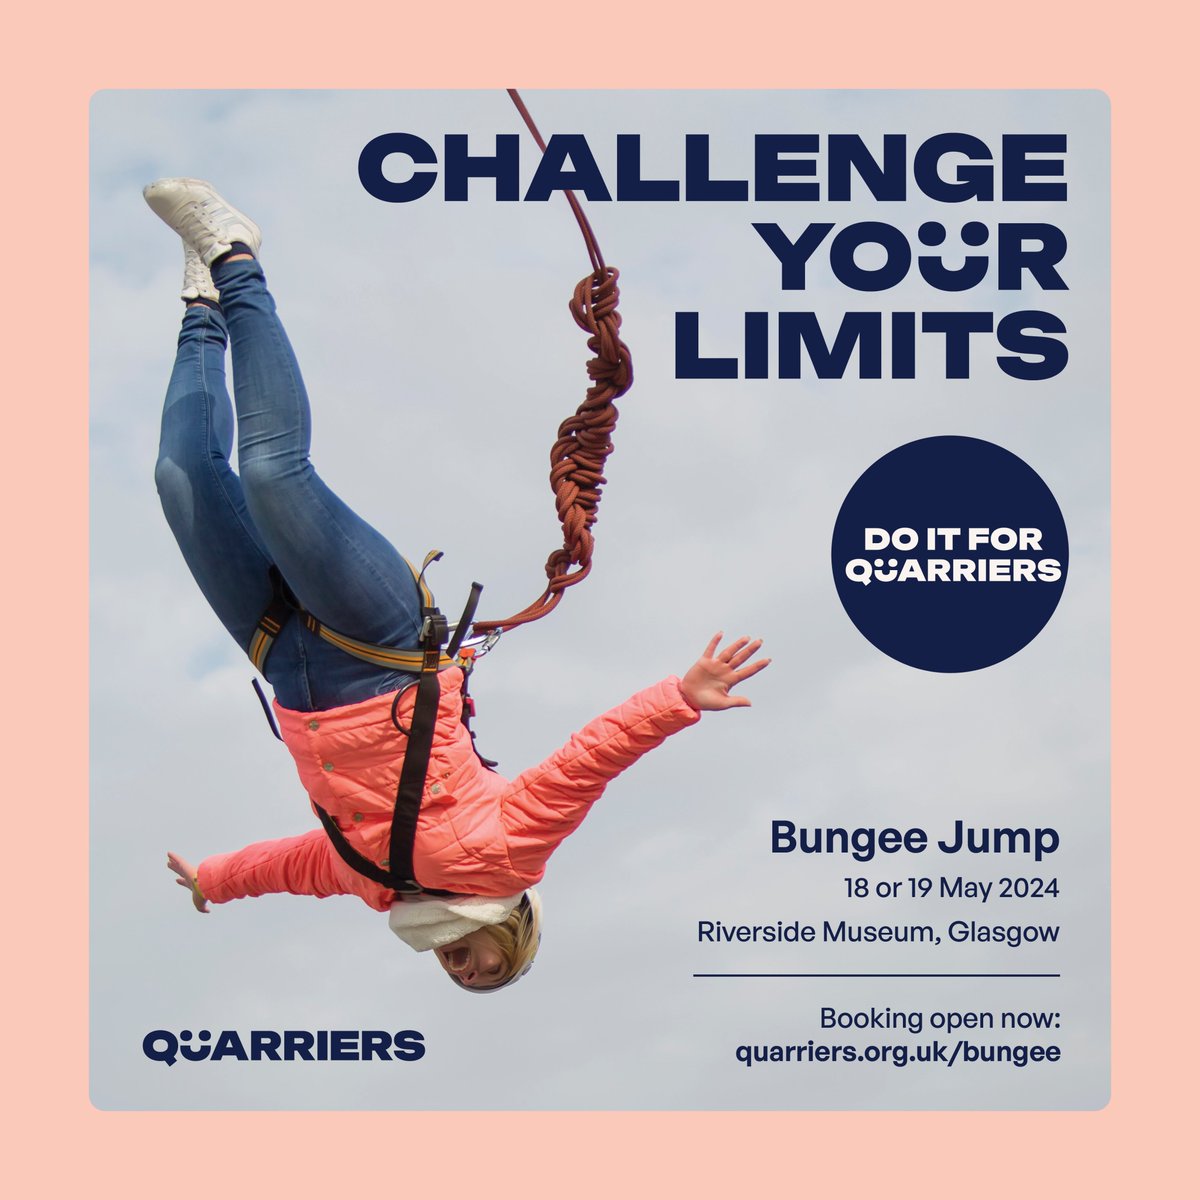 .@Quarriers, one of Scotland's leading social care charities, is thrilled to announce that it is involved in an exhilarating charity bungee jump taking place at the iconic Riverside Museum! 𝗙𝗶𝗻𝗱 𝗼𝘂𝘁 𝗺𝗼𝗿𝗲: tinyurl.com/4bvzktfh